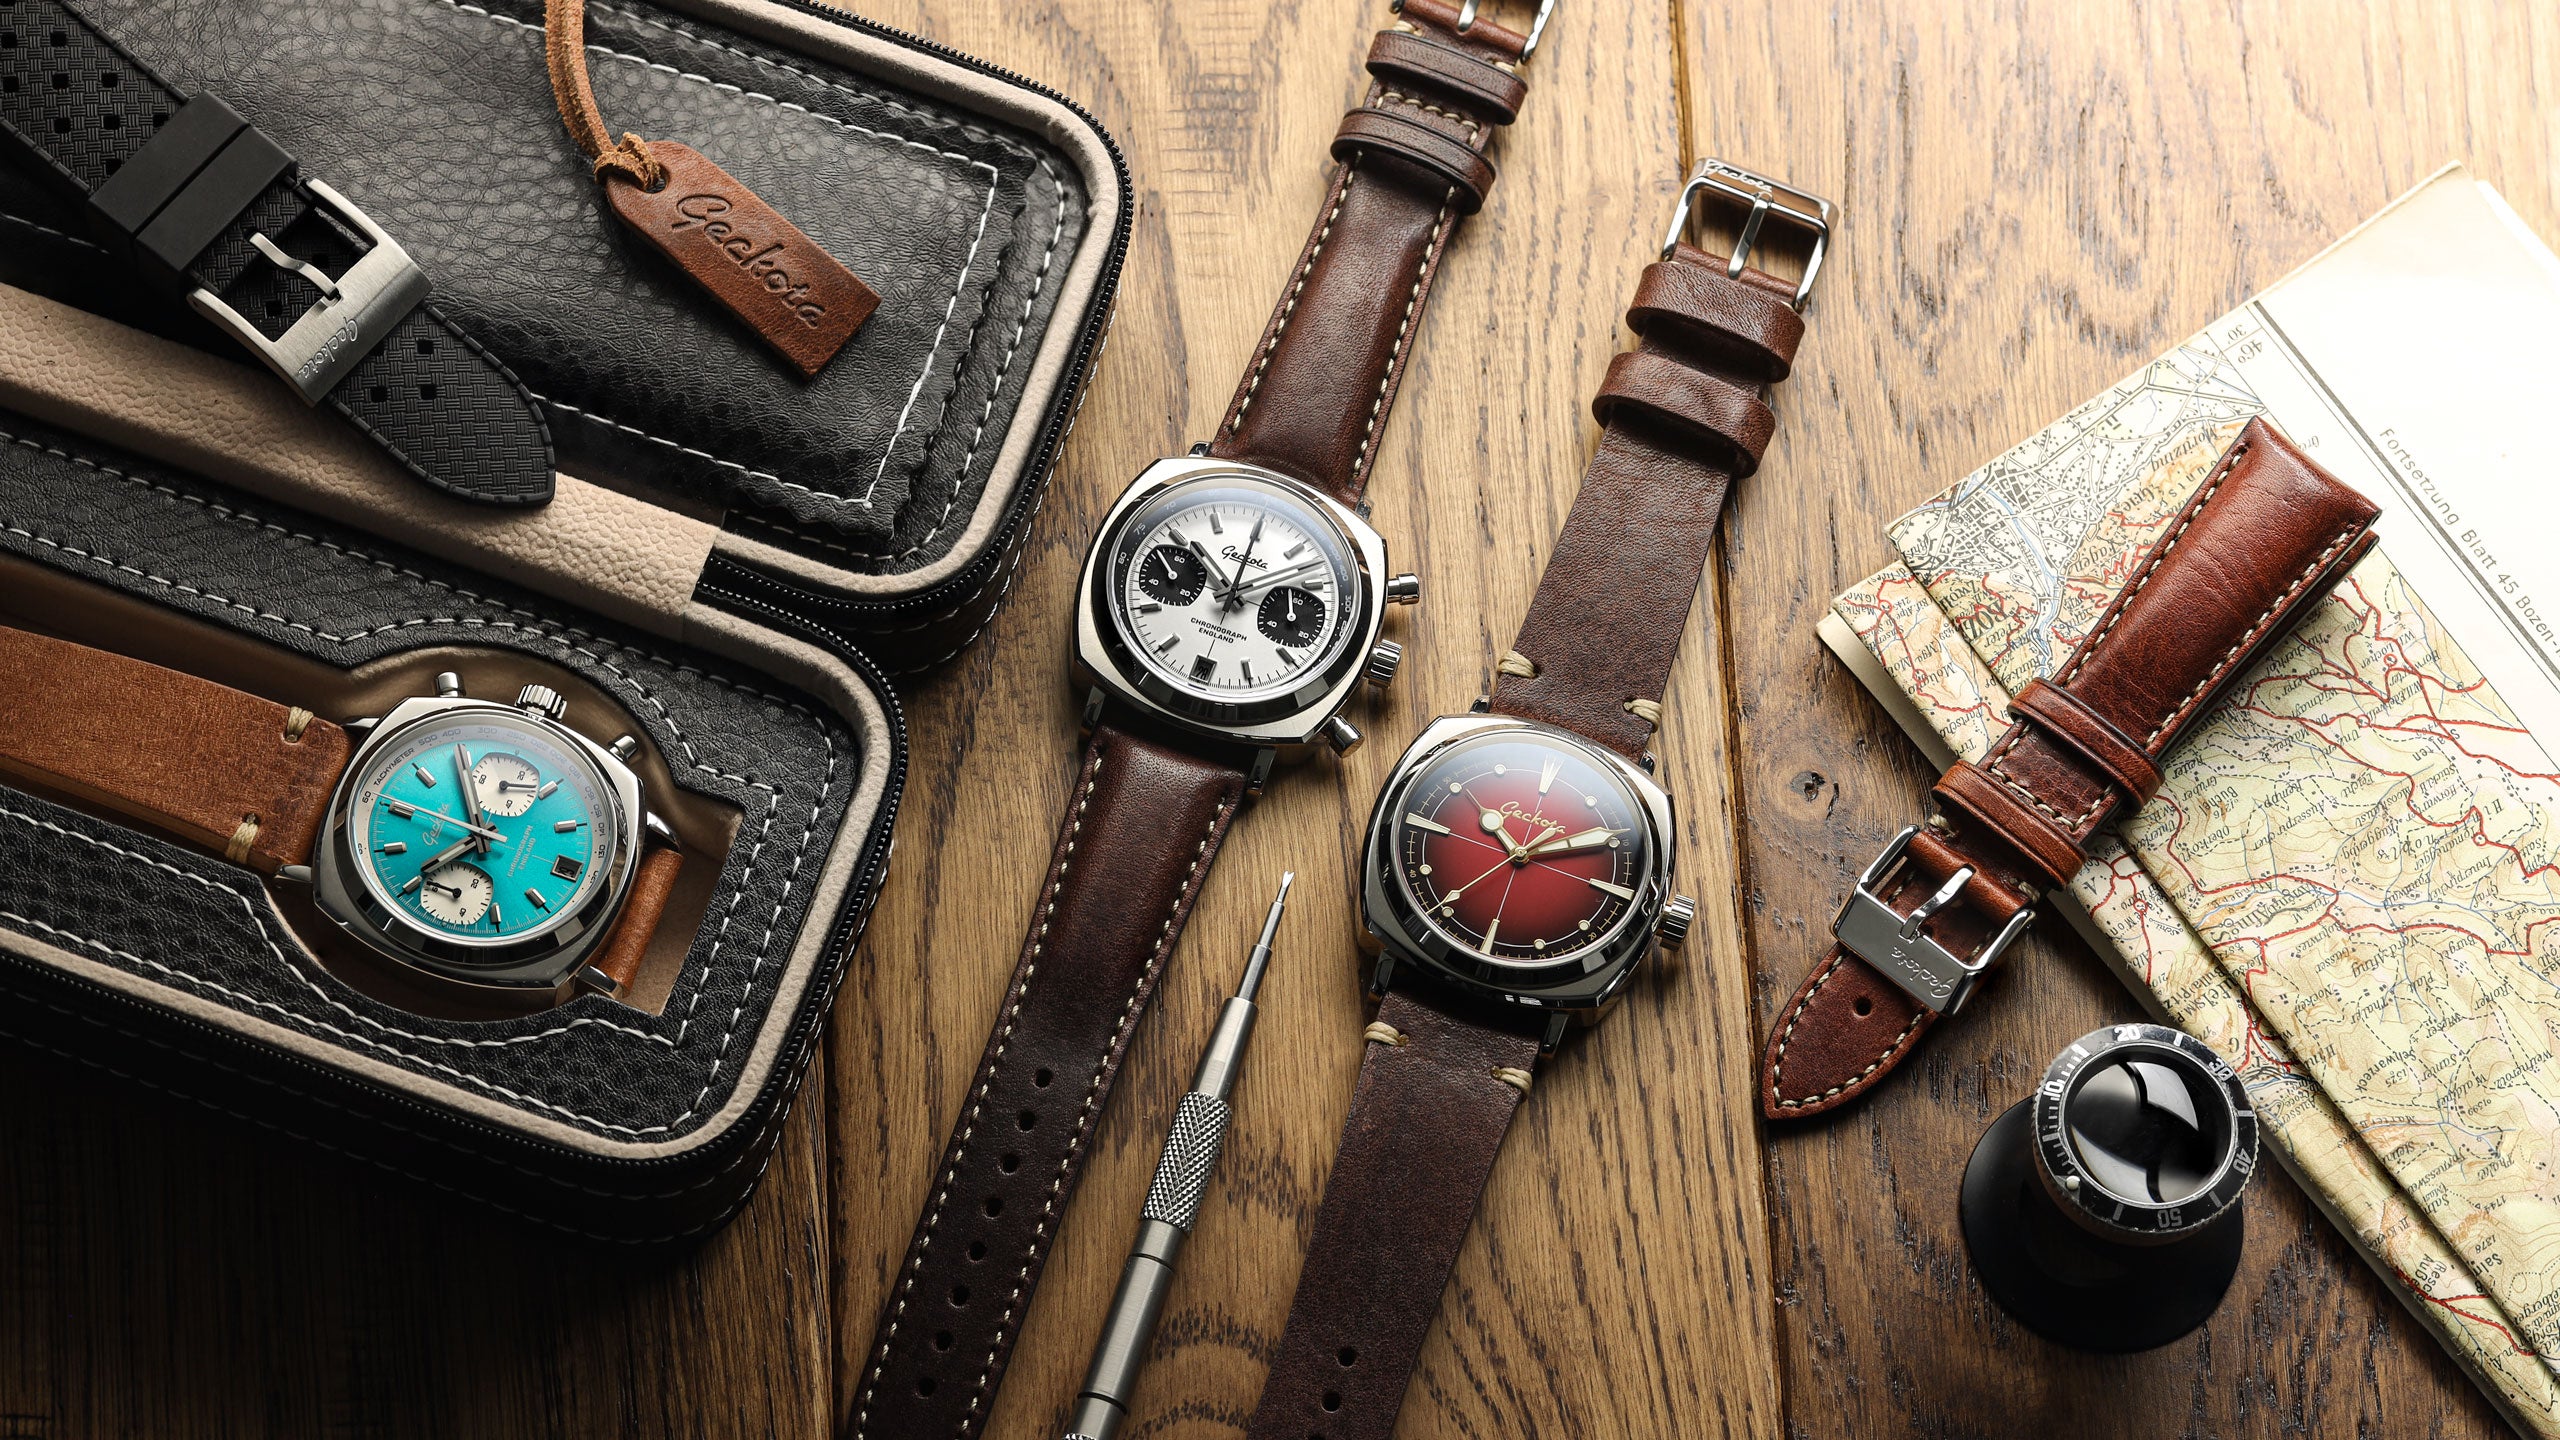 Geckota Chronotimer and Pioneer Watches